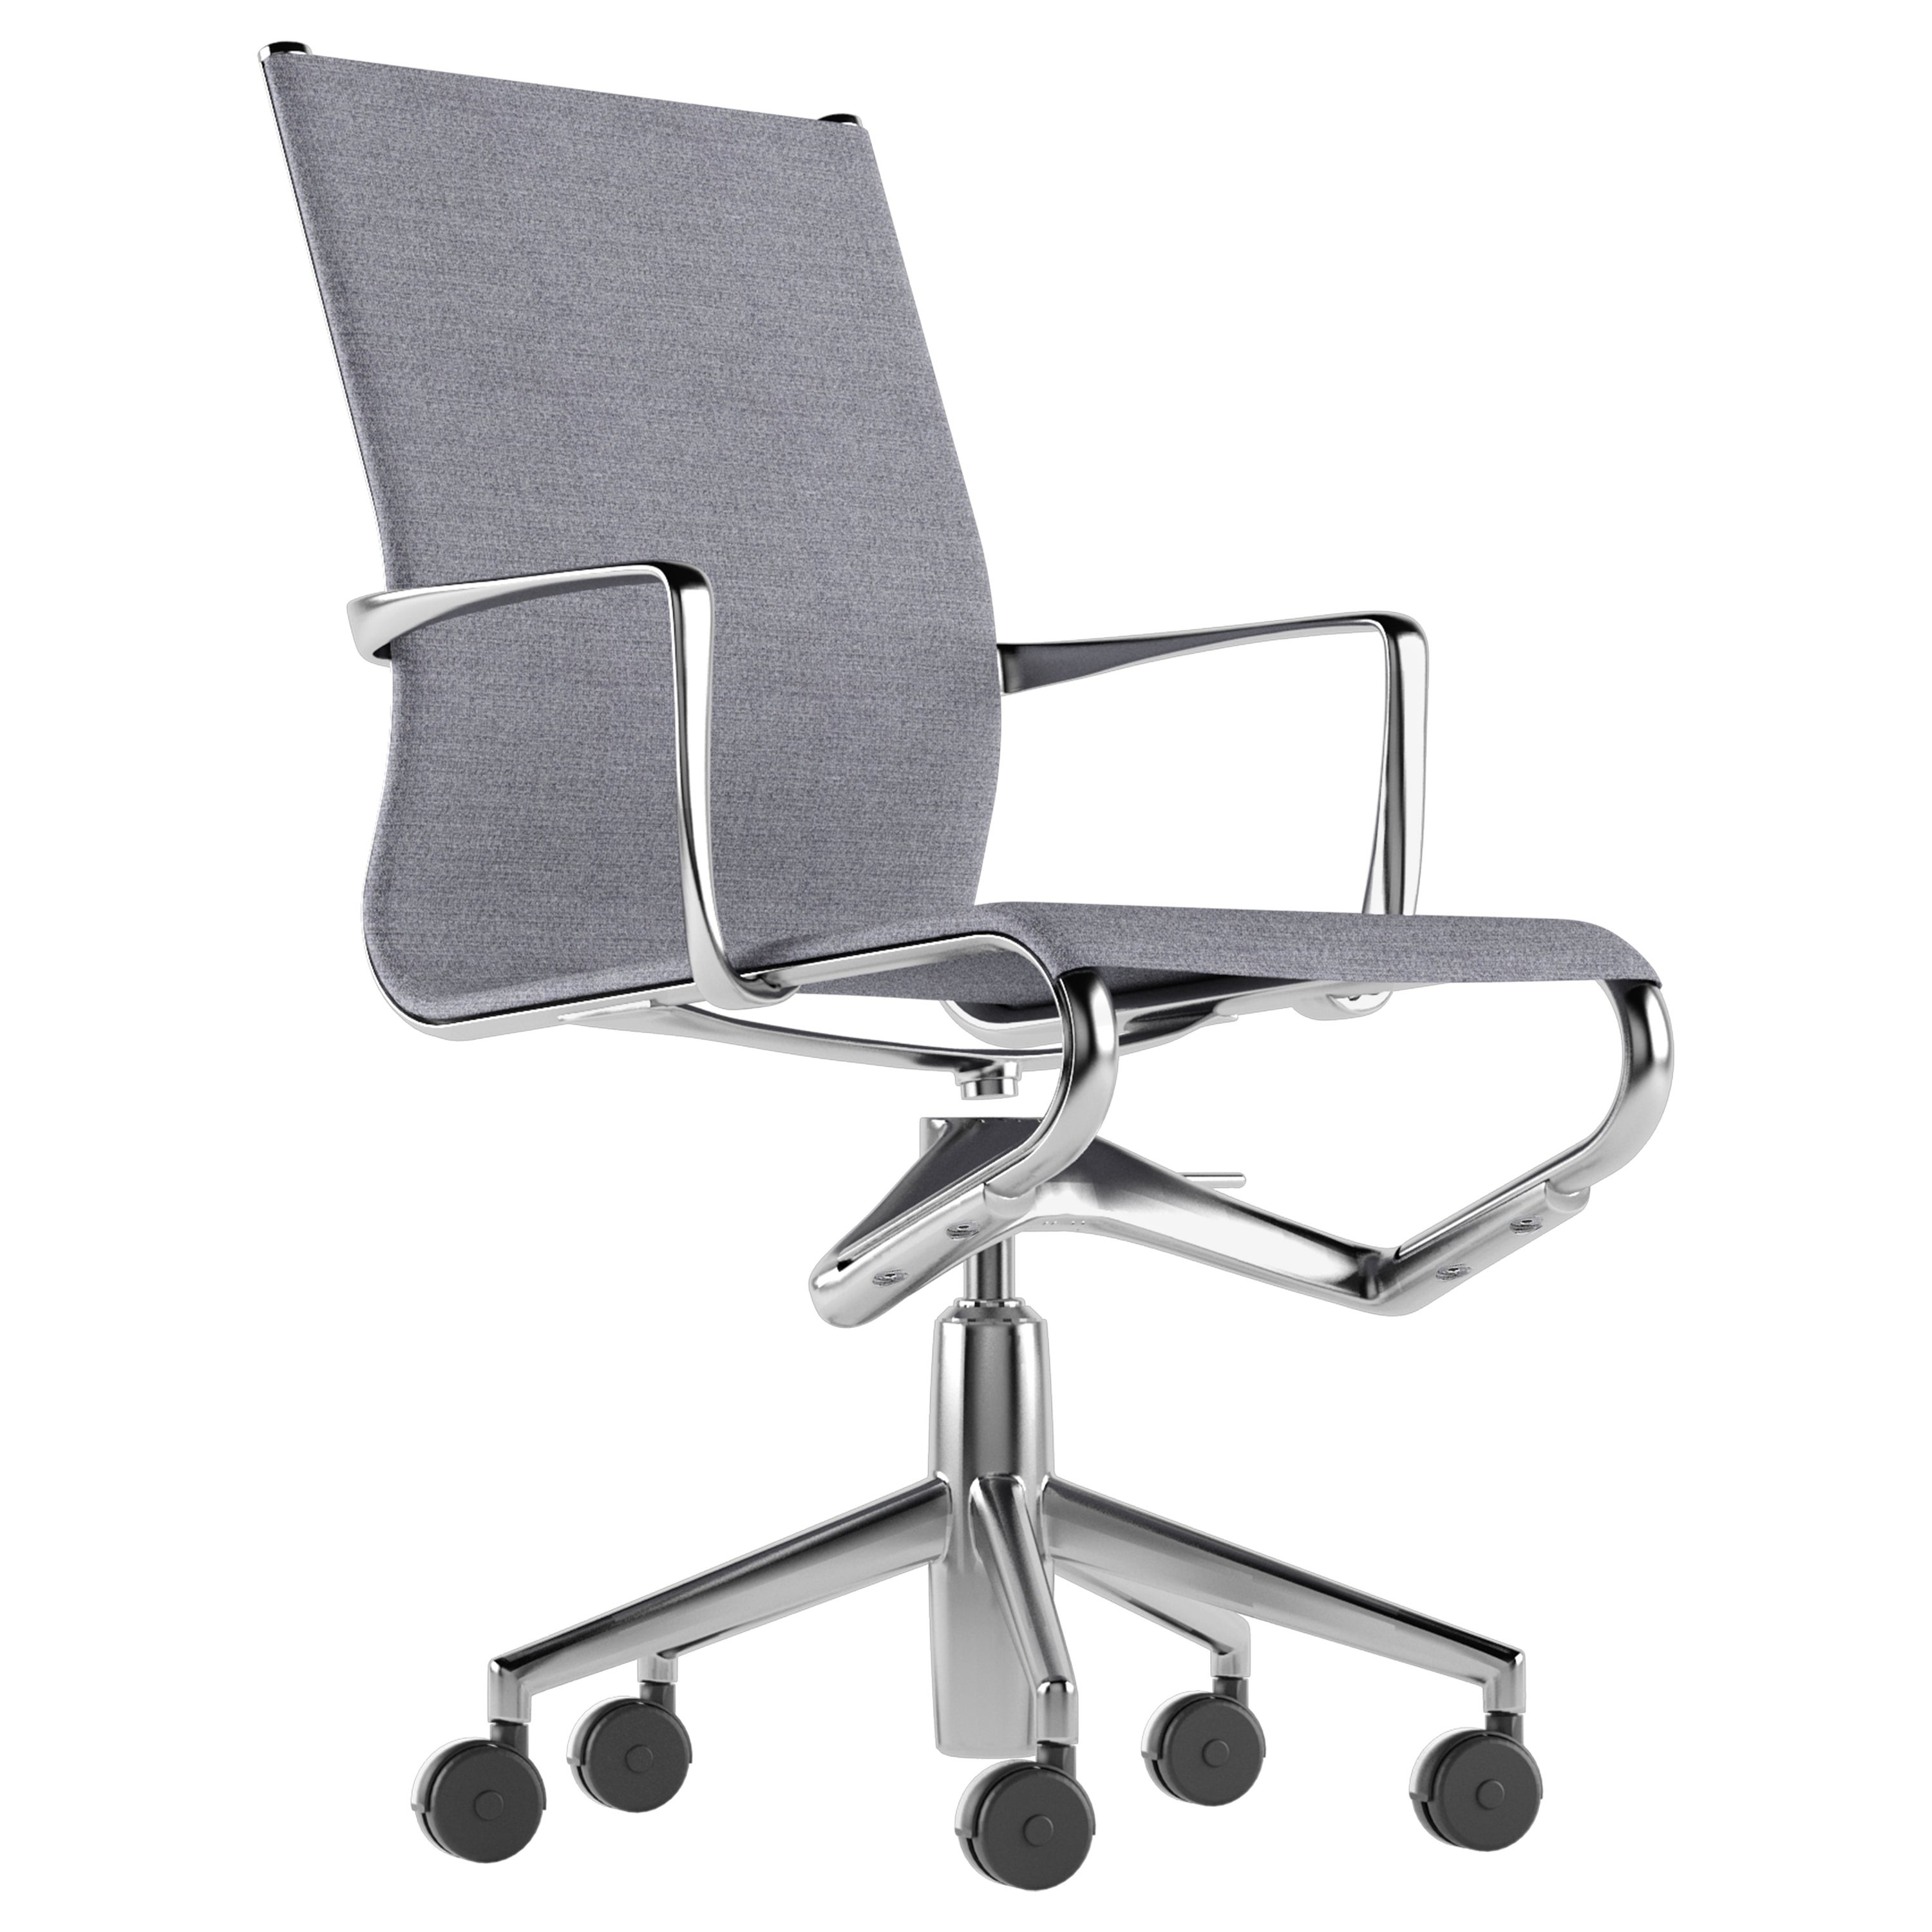 Alias 434 Rollingframe 44 Chair in Grey Seat with Chromed Aluminum Frame For Sale